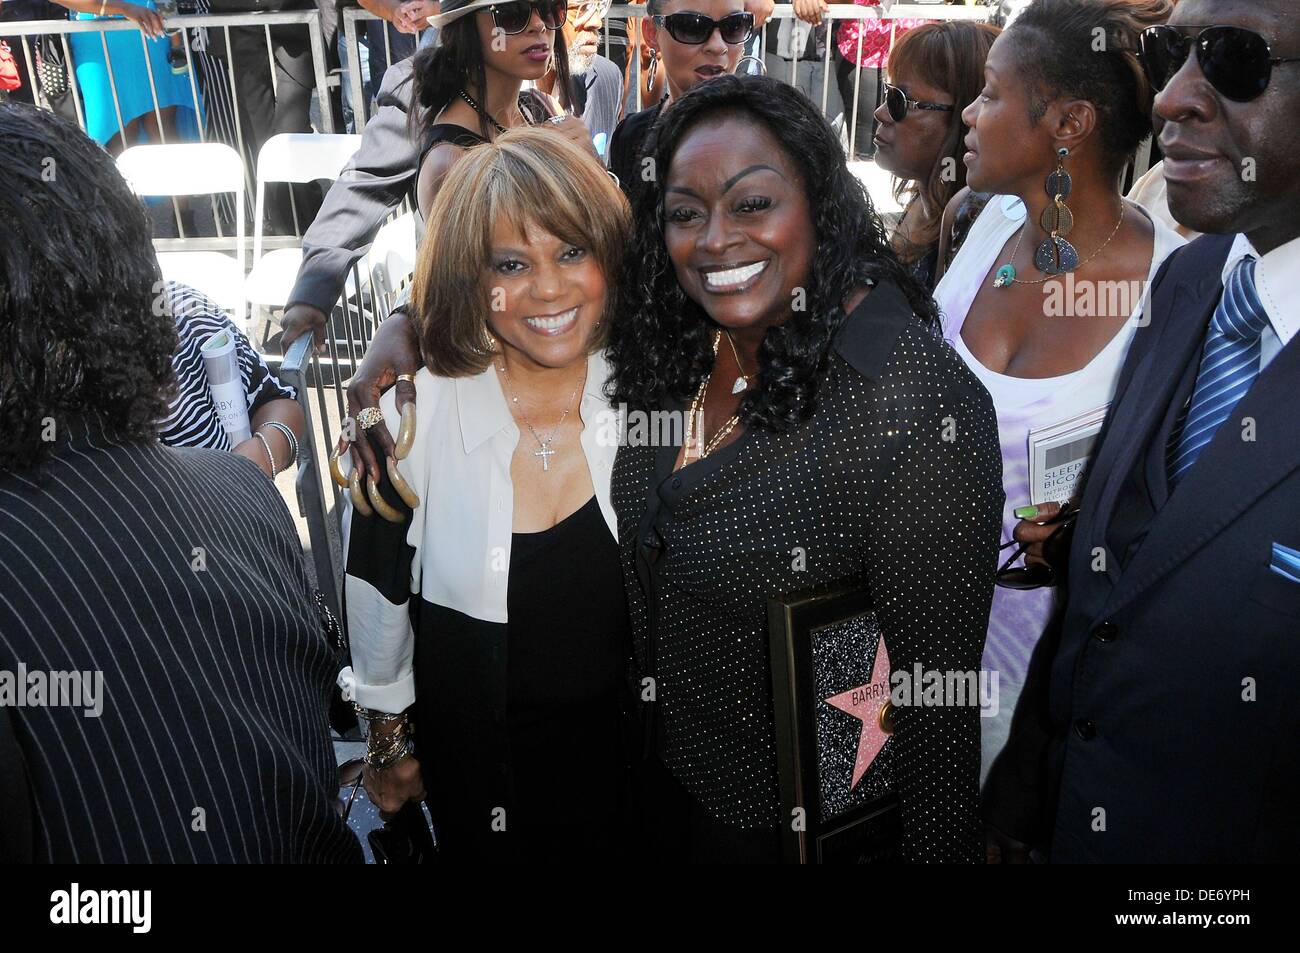 Los Angeles, California, USA. 12th Sep, 2013. Claudette Robinson, Glodean White at the induction ceremony for Star on the Hollywood Walk of Fame for Barry White, Hollywood Boulevard, Los Angeles, California, USA September 12, 2013. Credit:  Michael Germana/Everett Collection/Alamy Live News Stock Photo